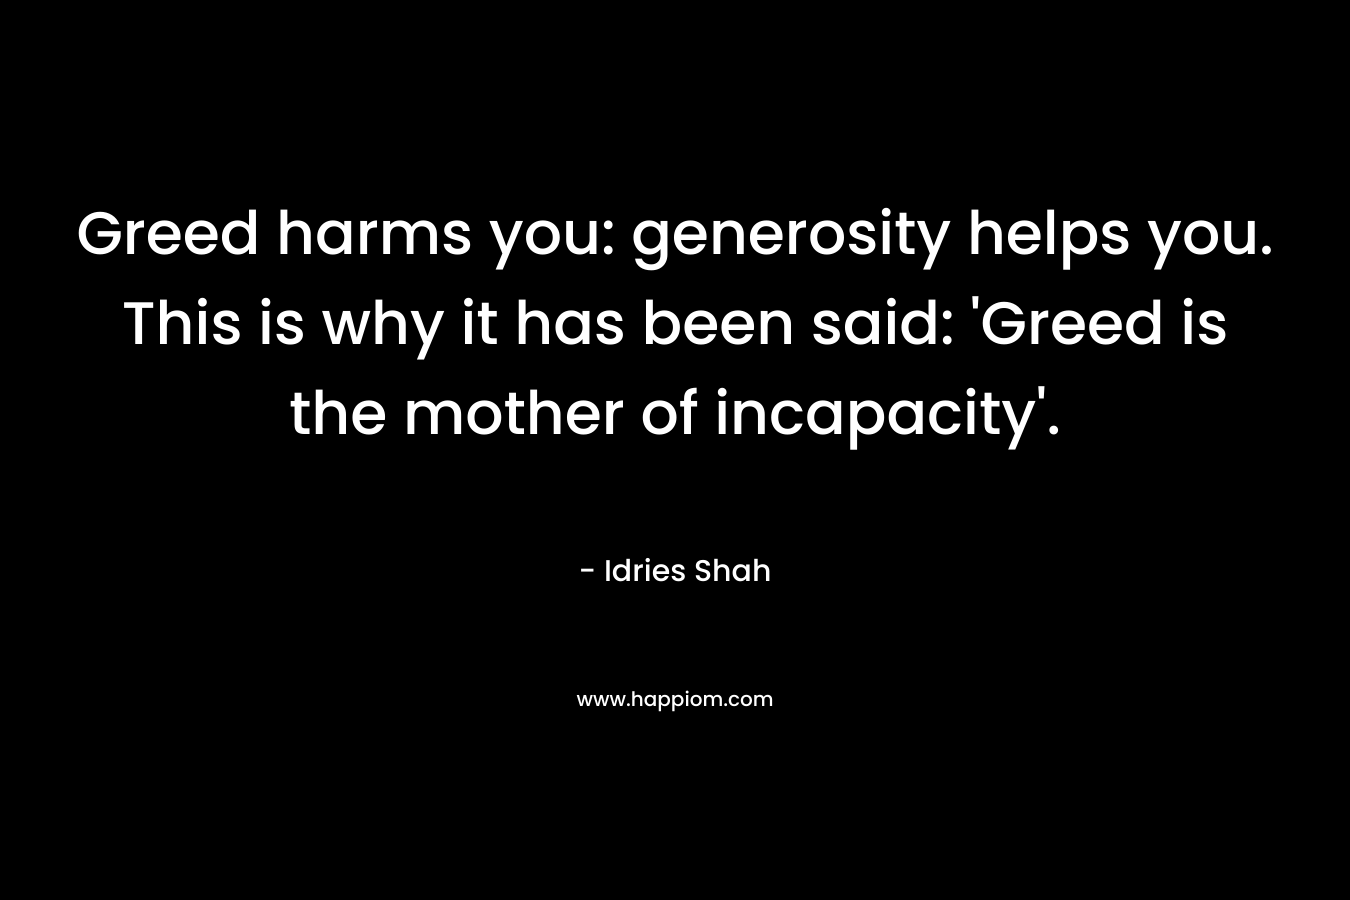 Greed harms you: generosity helps you. This is why it has been said: ‘Greed is the mother of incapacity’. – Idries Shah